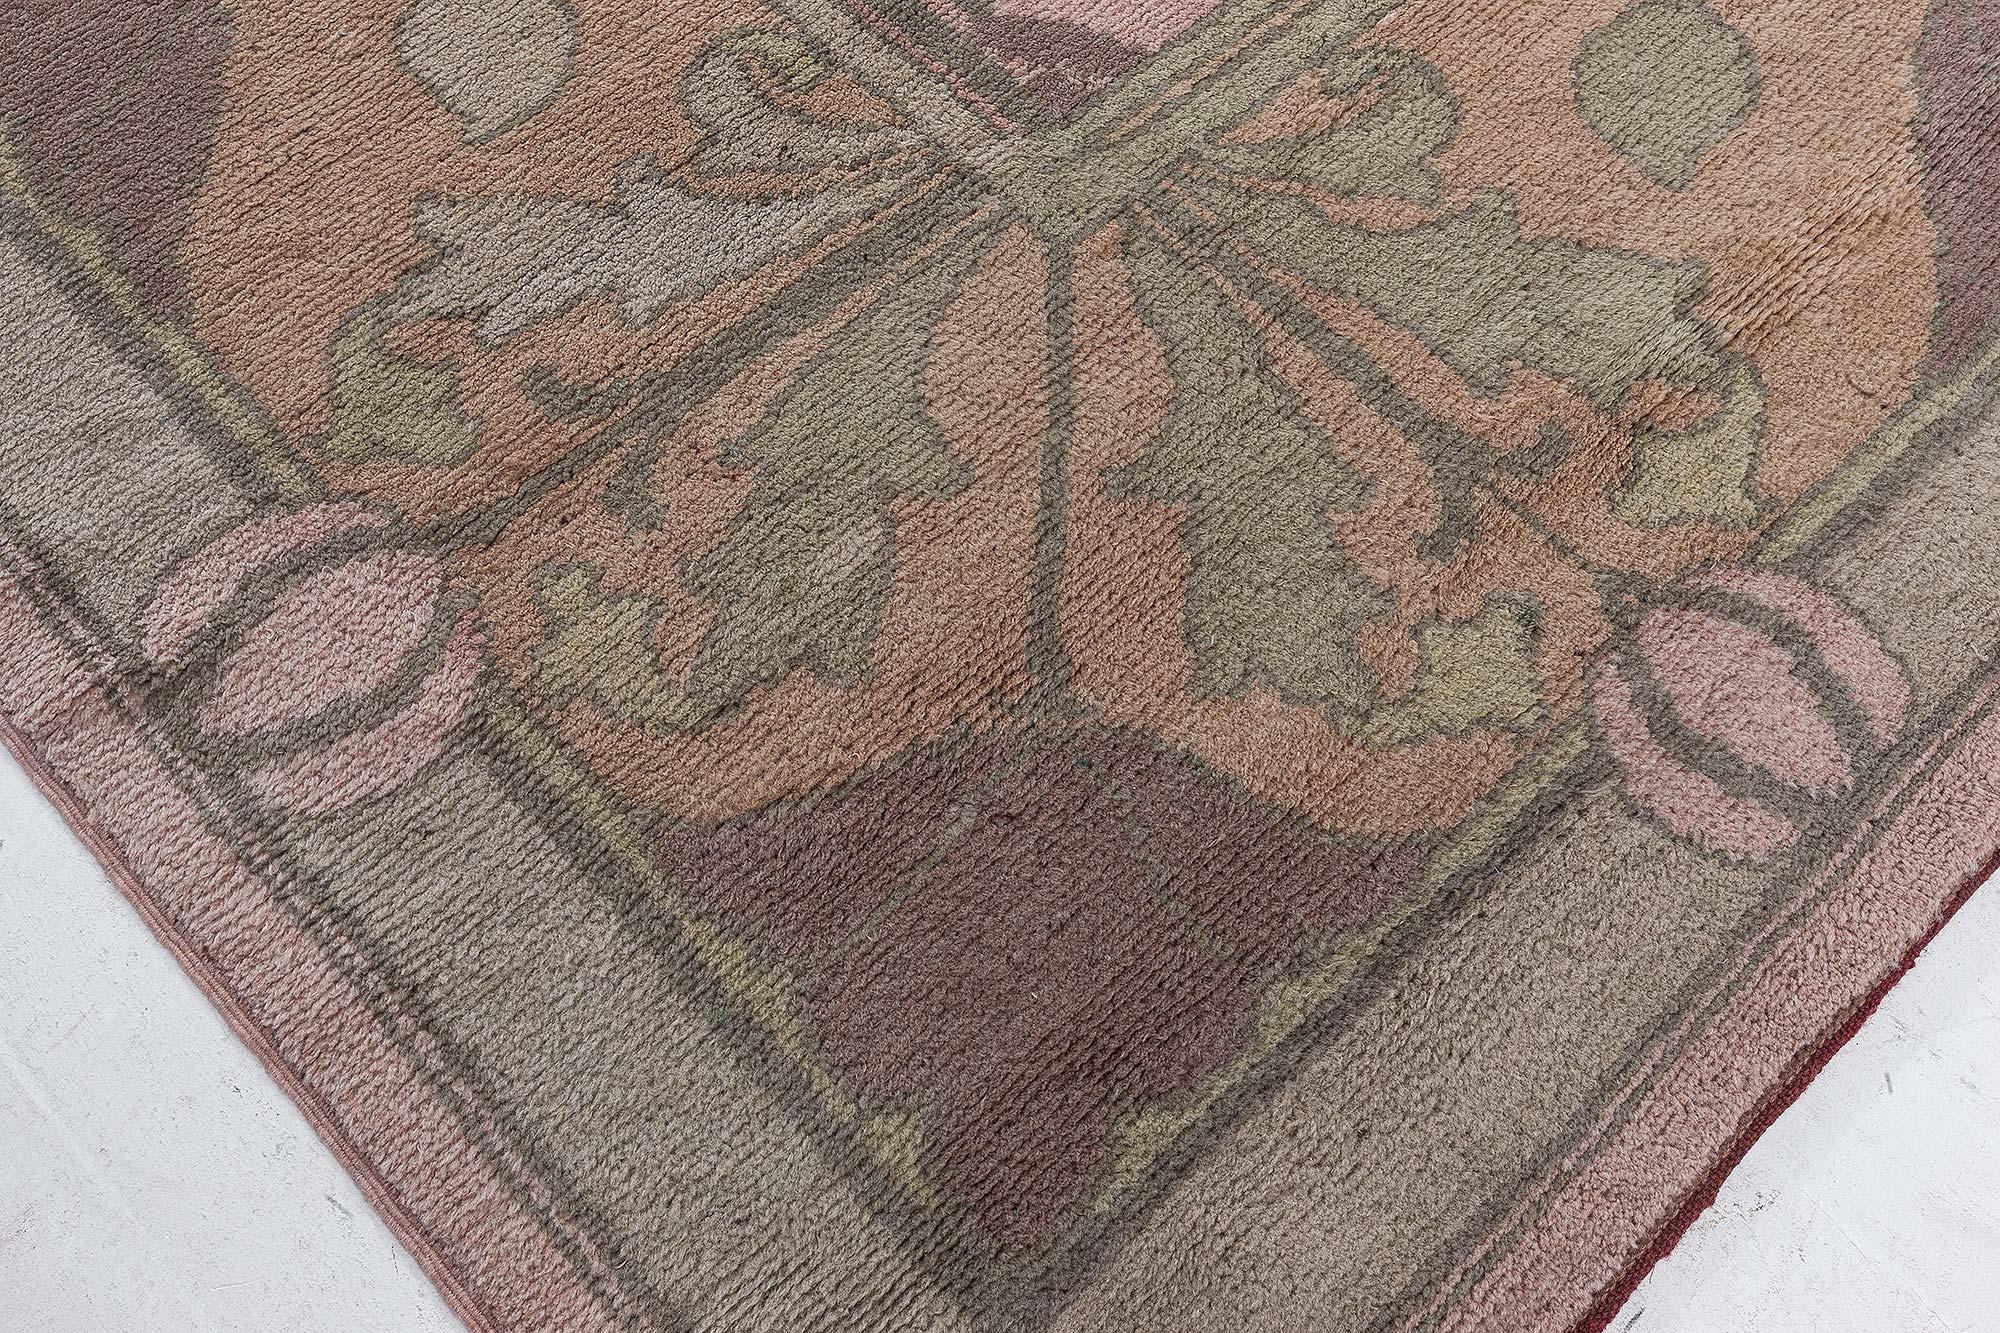 Antique Arts and Crafts Rug
Size: 10'8